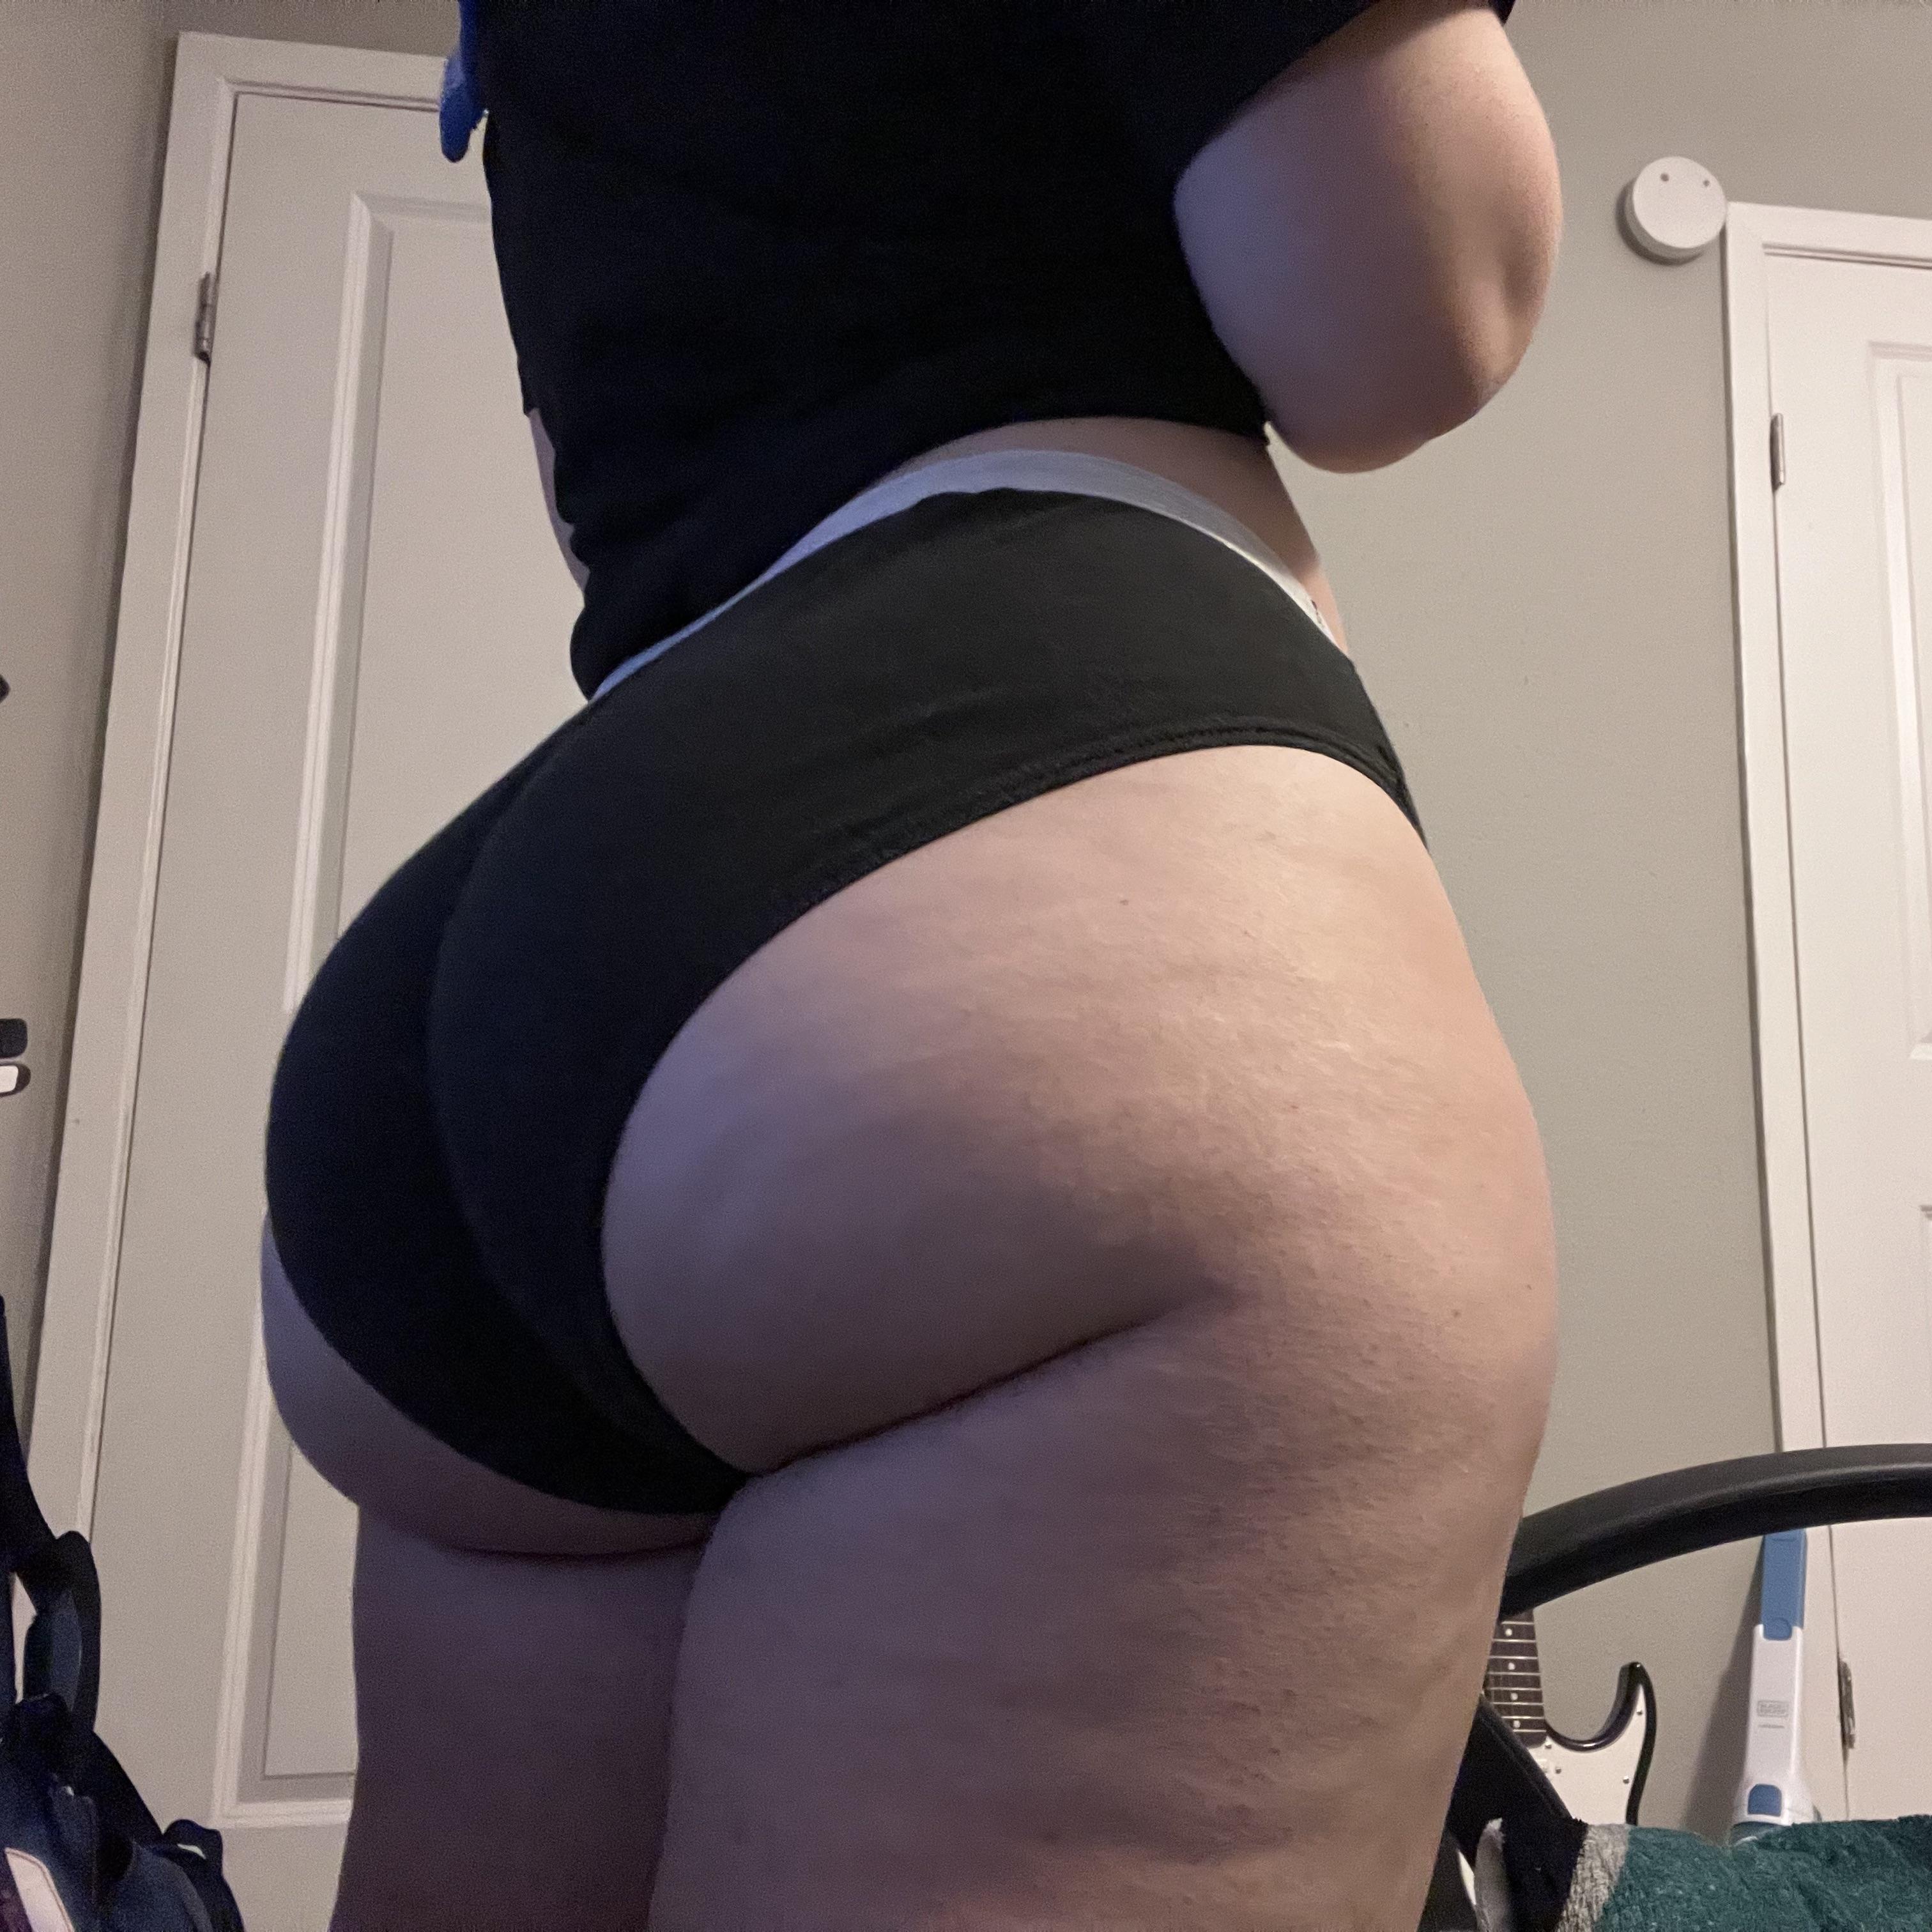 PAWG I brought you a snack